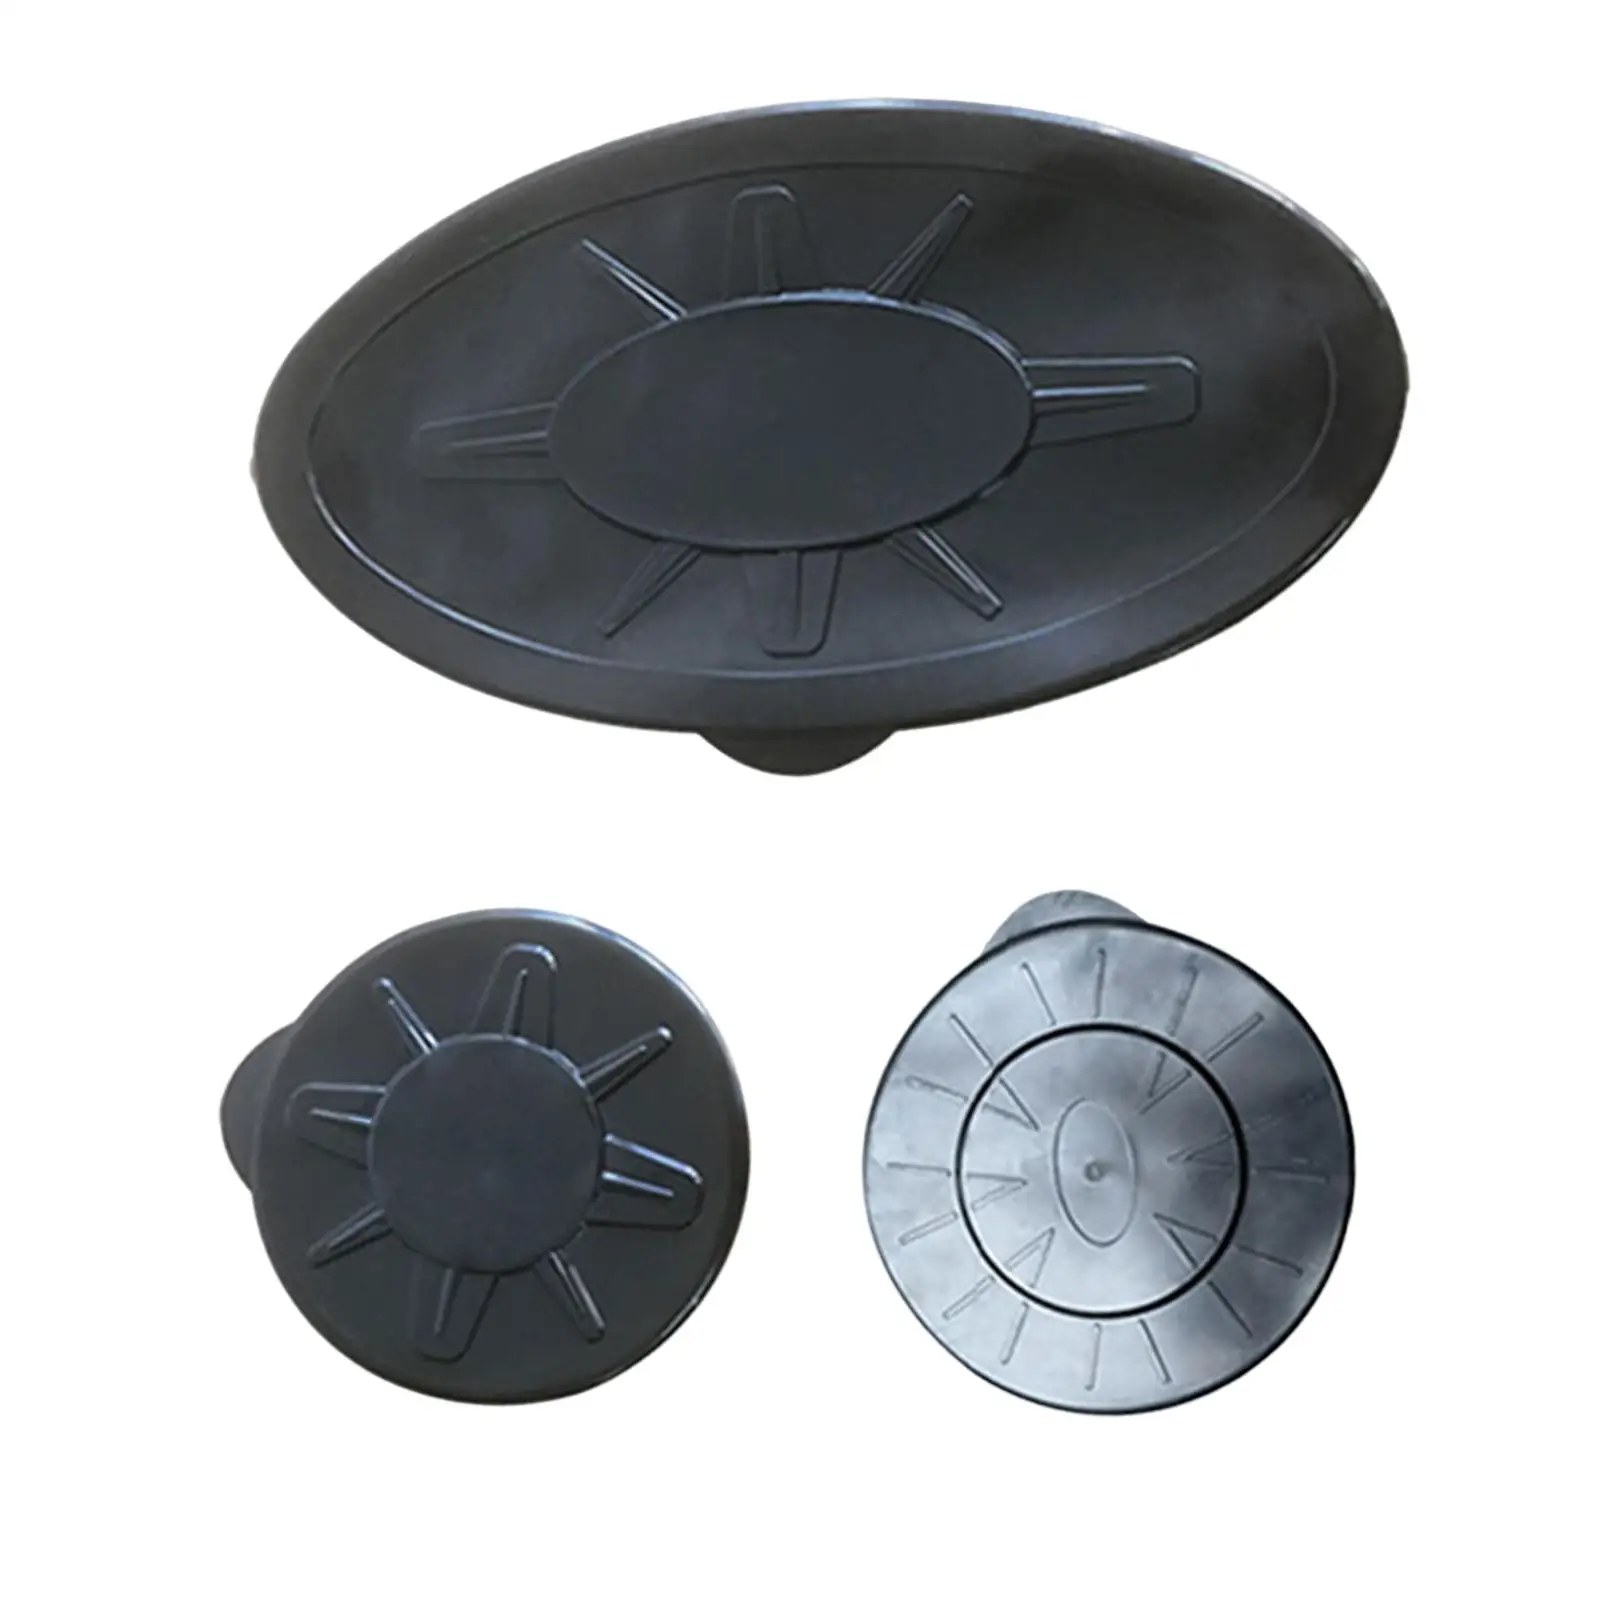 Kayak Hatches Boat Sealing Hatch Plate Replacement Hatches for Boat Kayak Marine